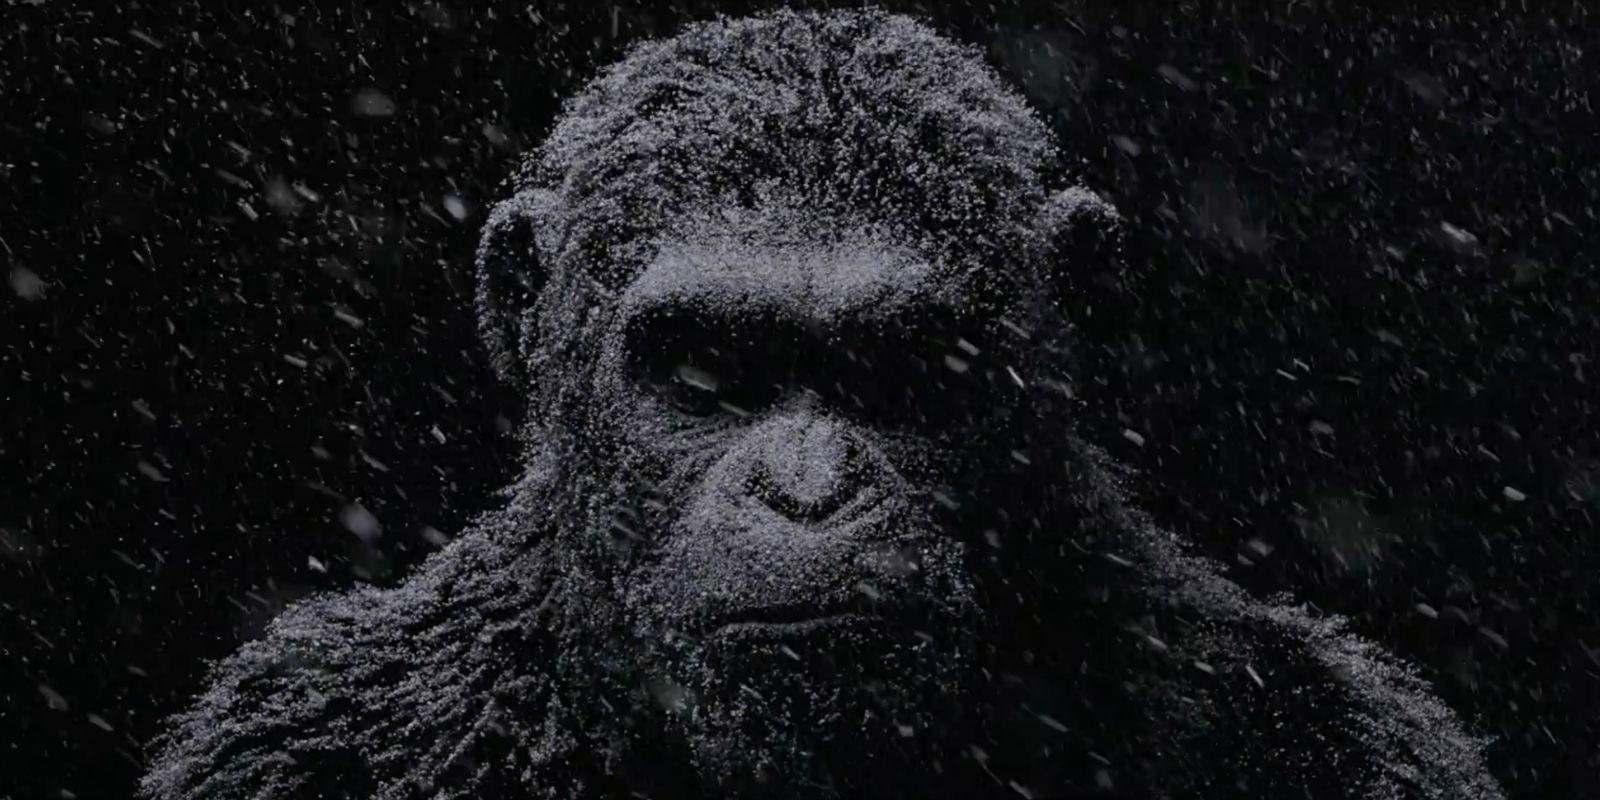 Planet of the Apes Interview: How The Series Can Continue After Caesar & Still Star Andy Serkis